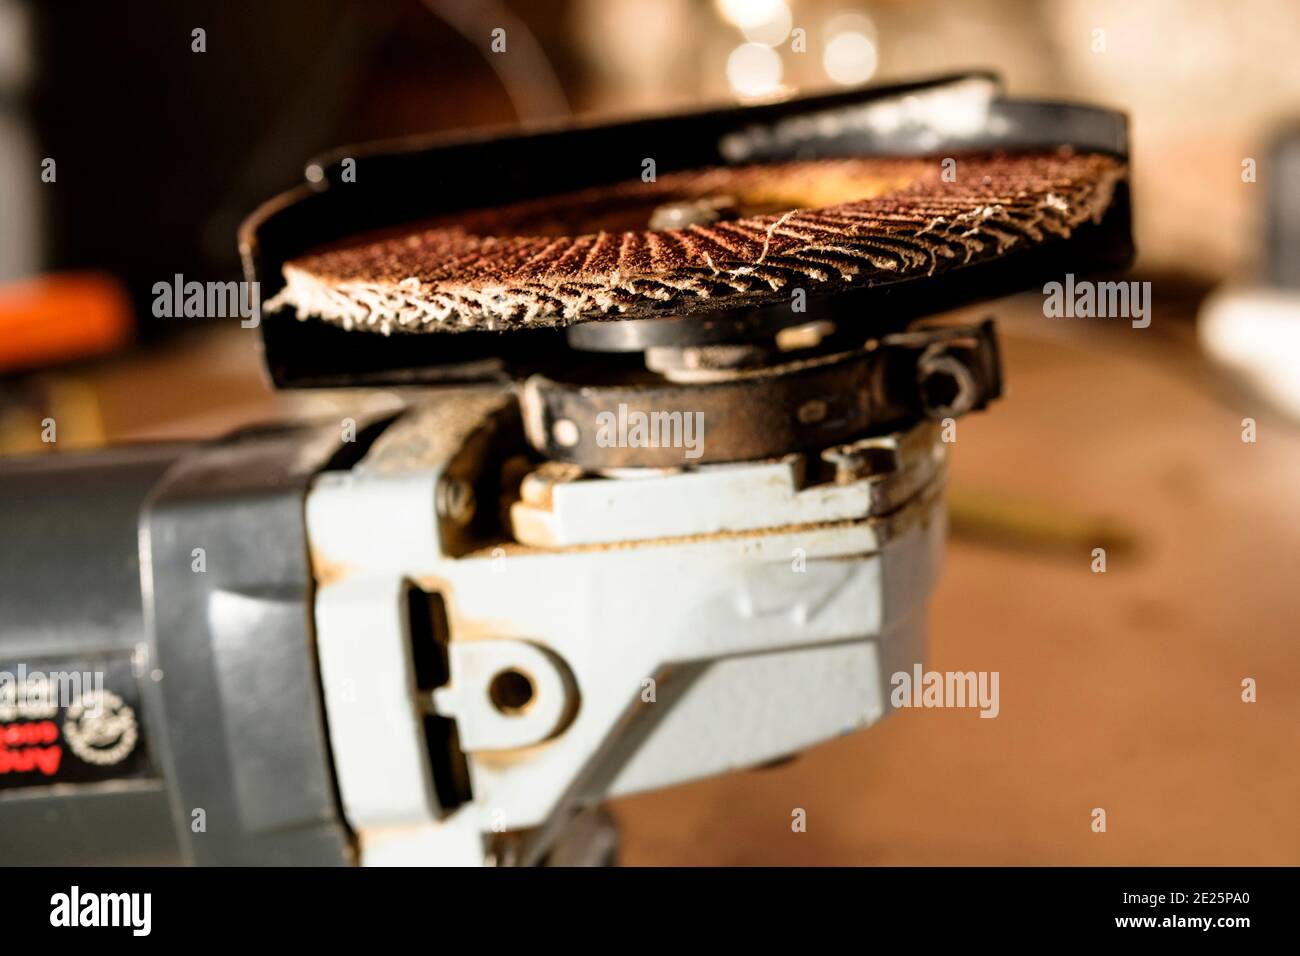 A flapy sanding disk mounted on a handheld angle ginder. Stock Photo